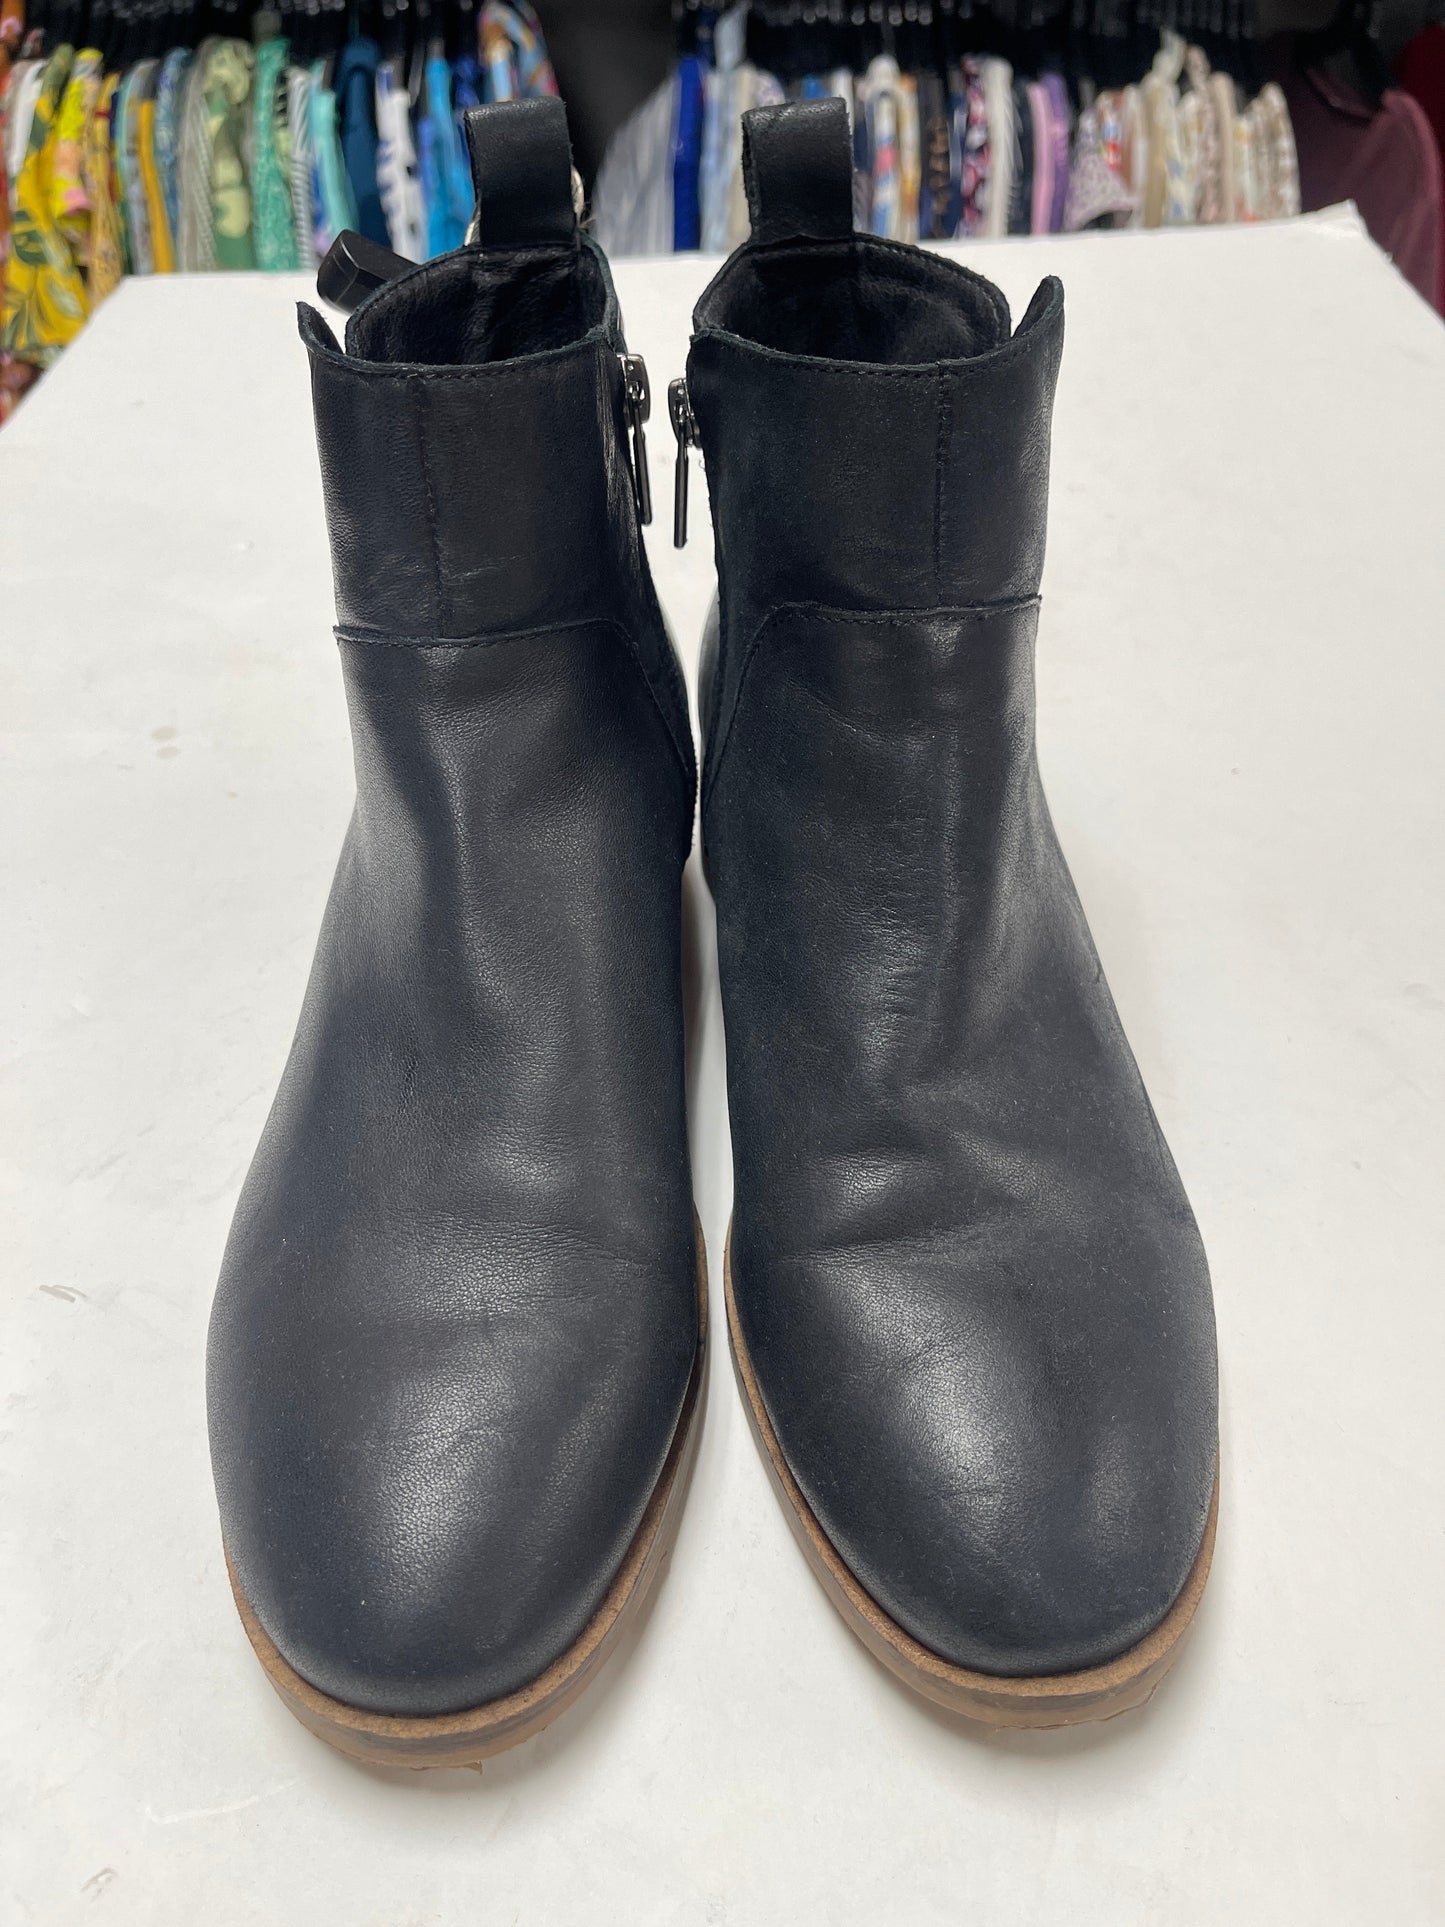 Black Boots Ankle Flats Lucky Brand, Size 9.5